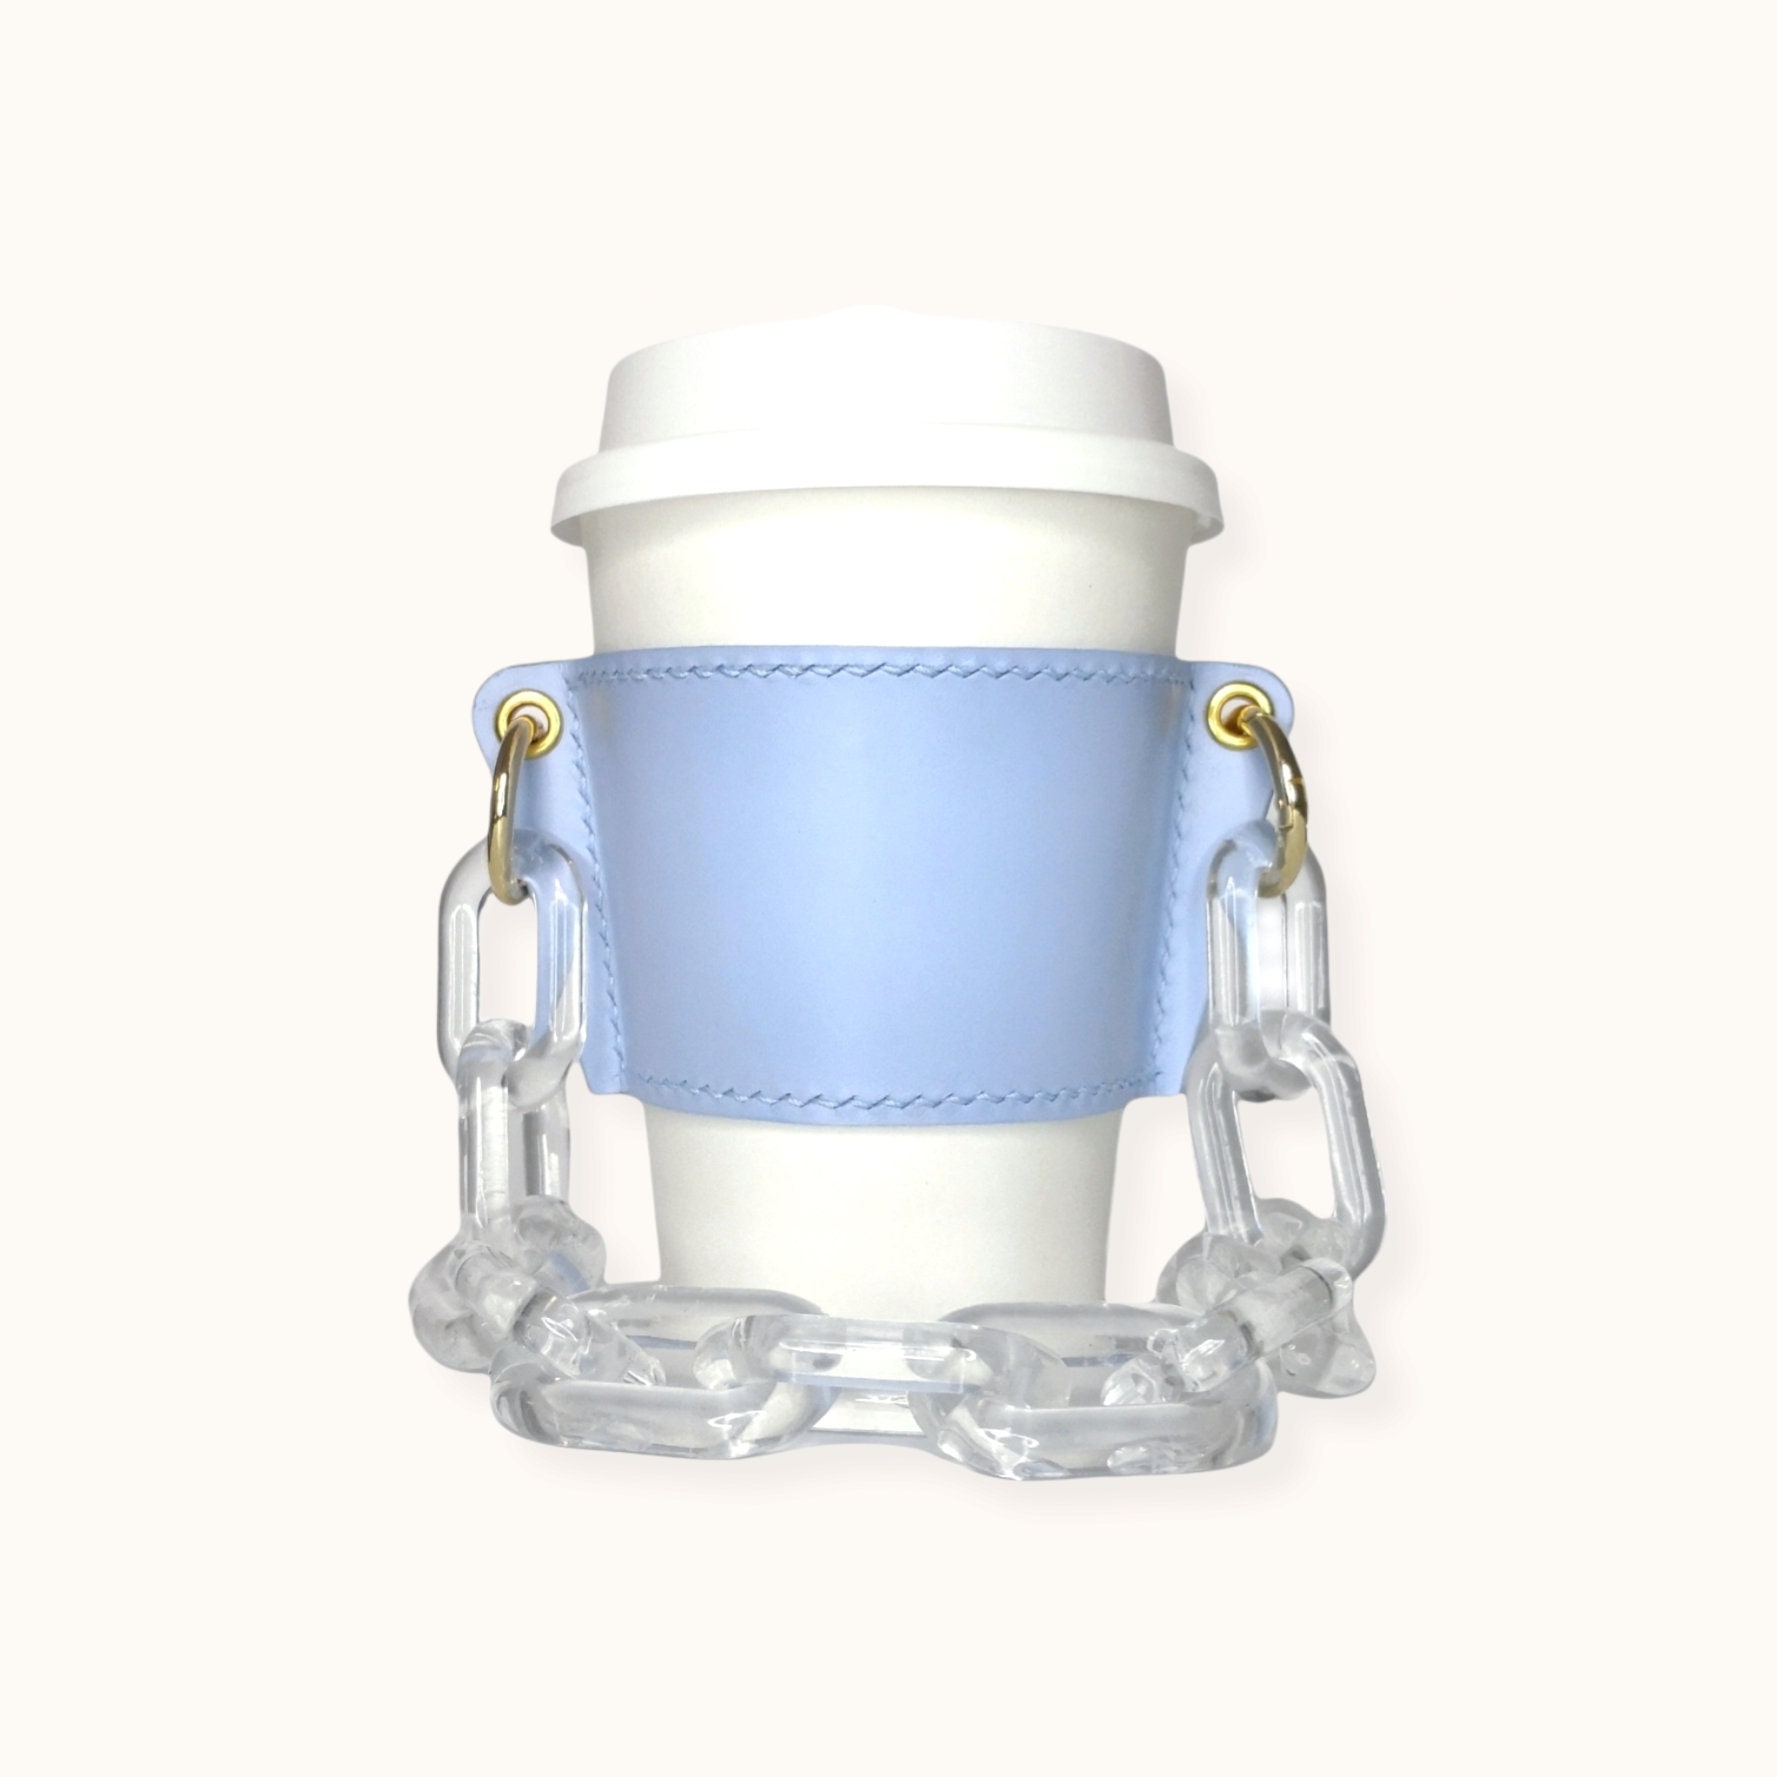 LEATHER Reusable Cupholder & Chain Handmade Coffee Cup -  Israel